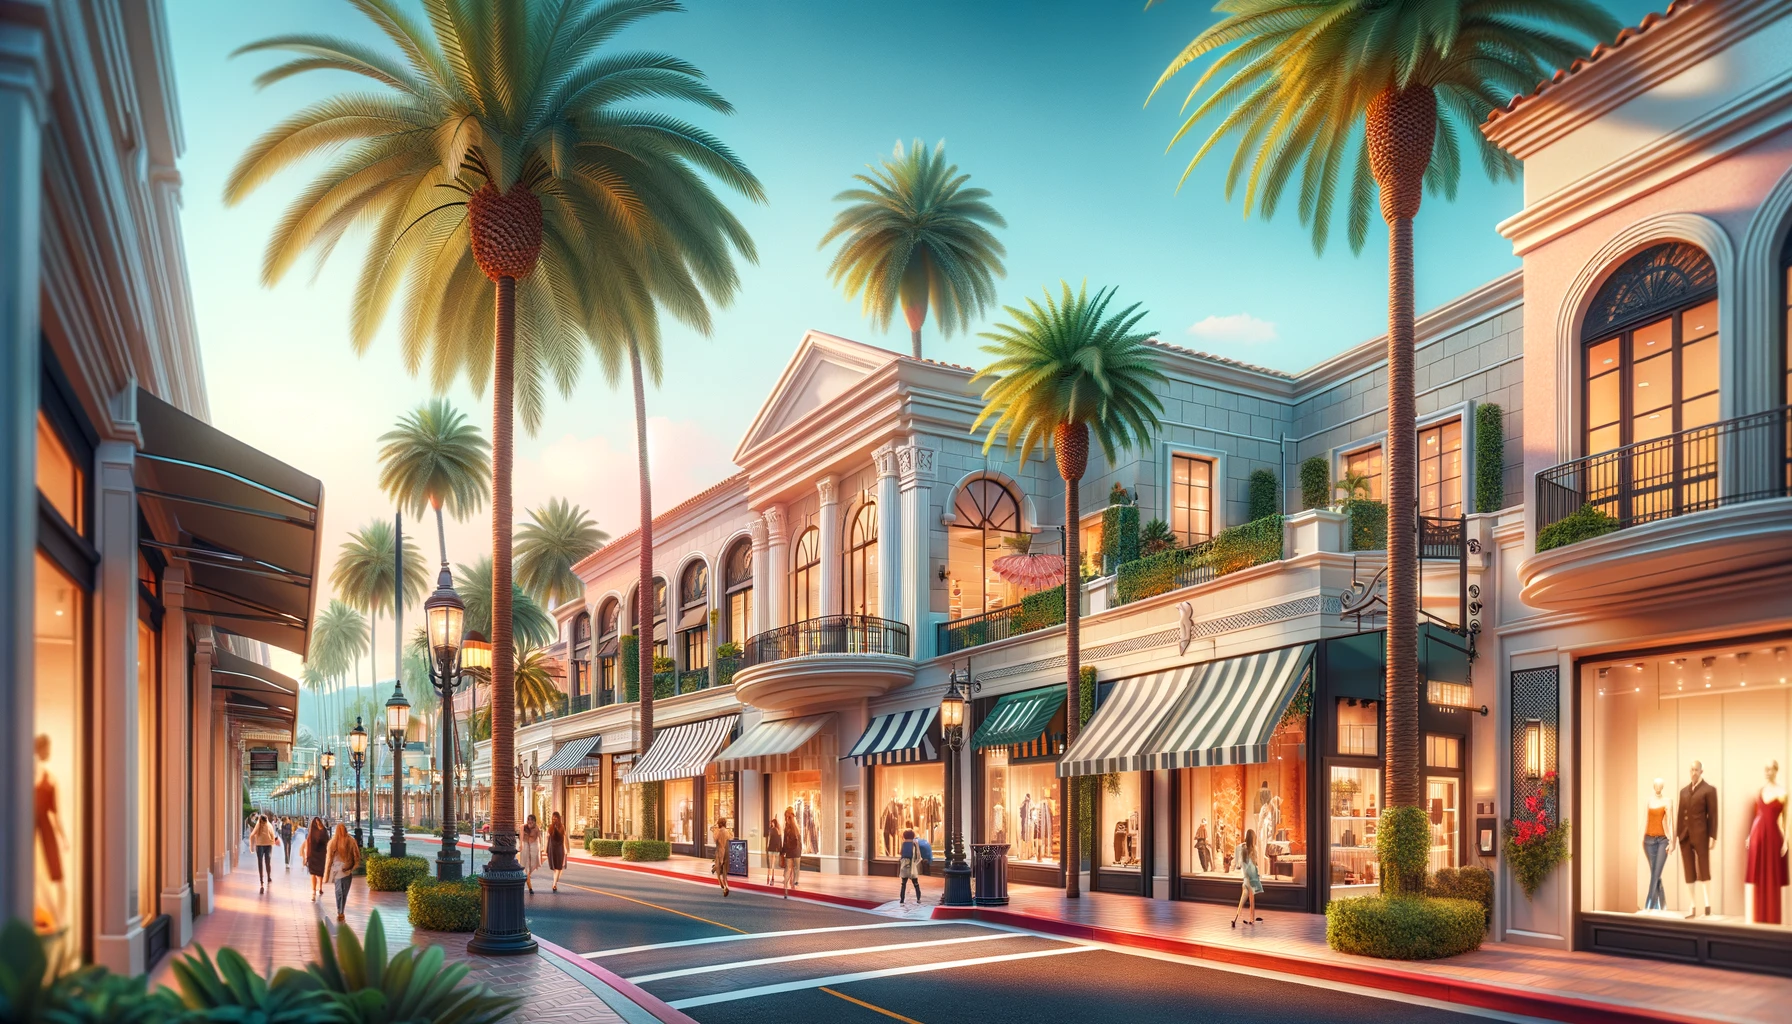 El Paseo Shopping District's chic storefronts and palm-lined street